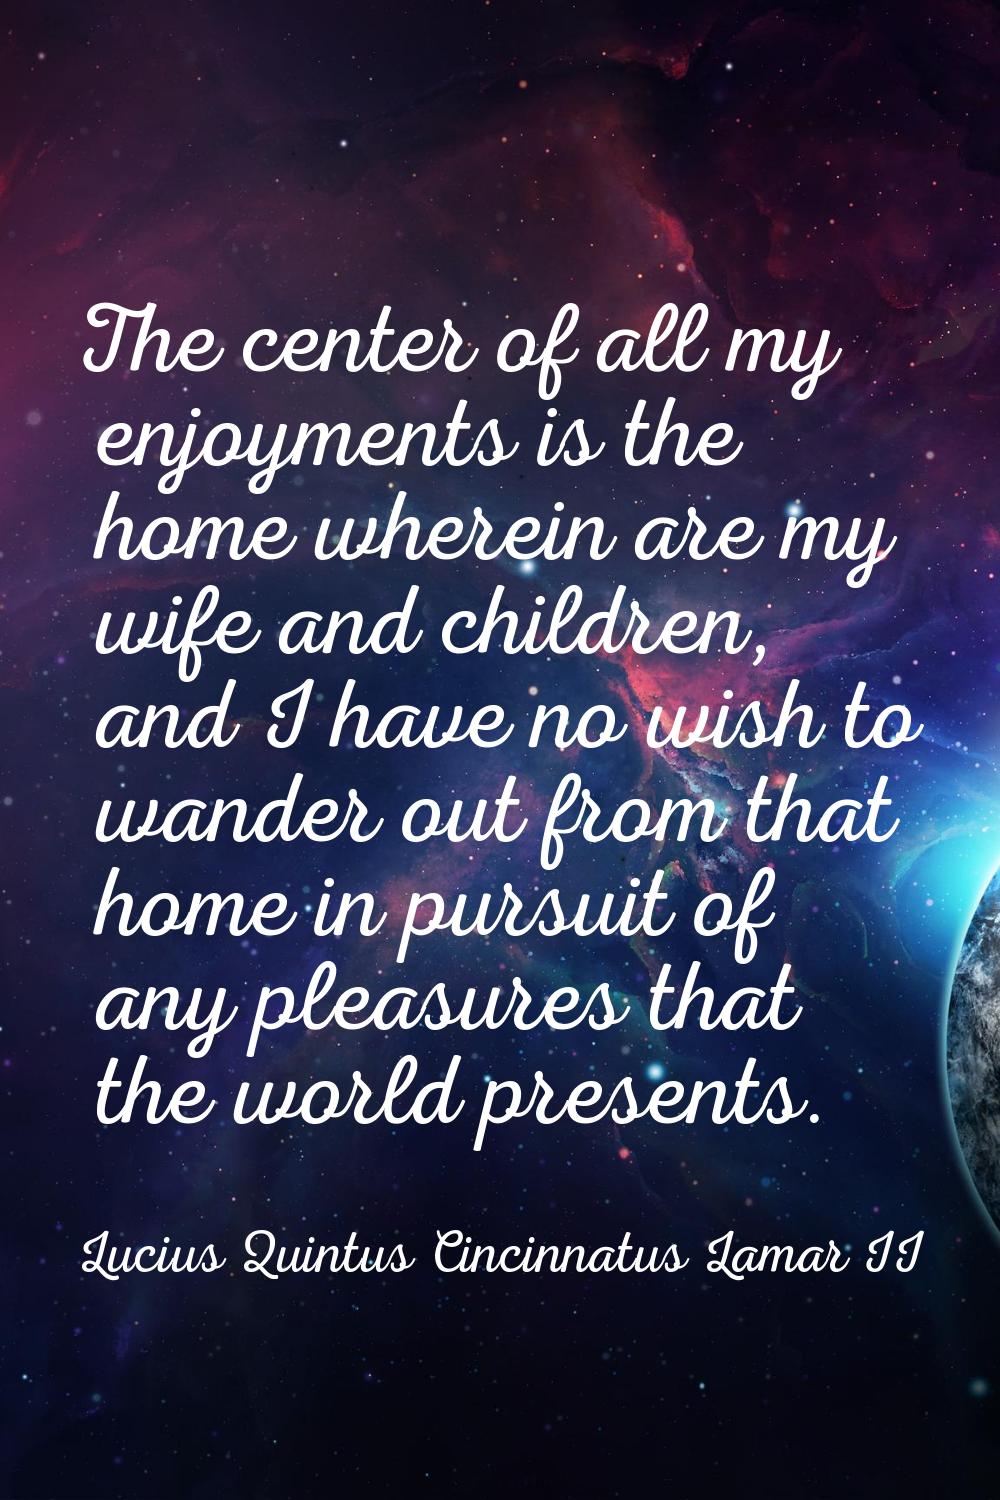 The center of all my enjoyments is the home wherein are my wife and children, and I have no wish to